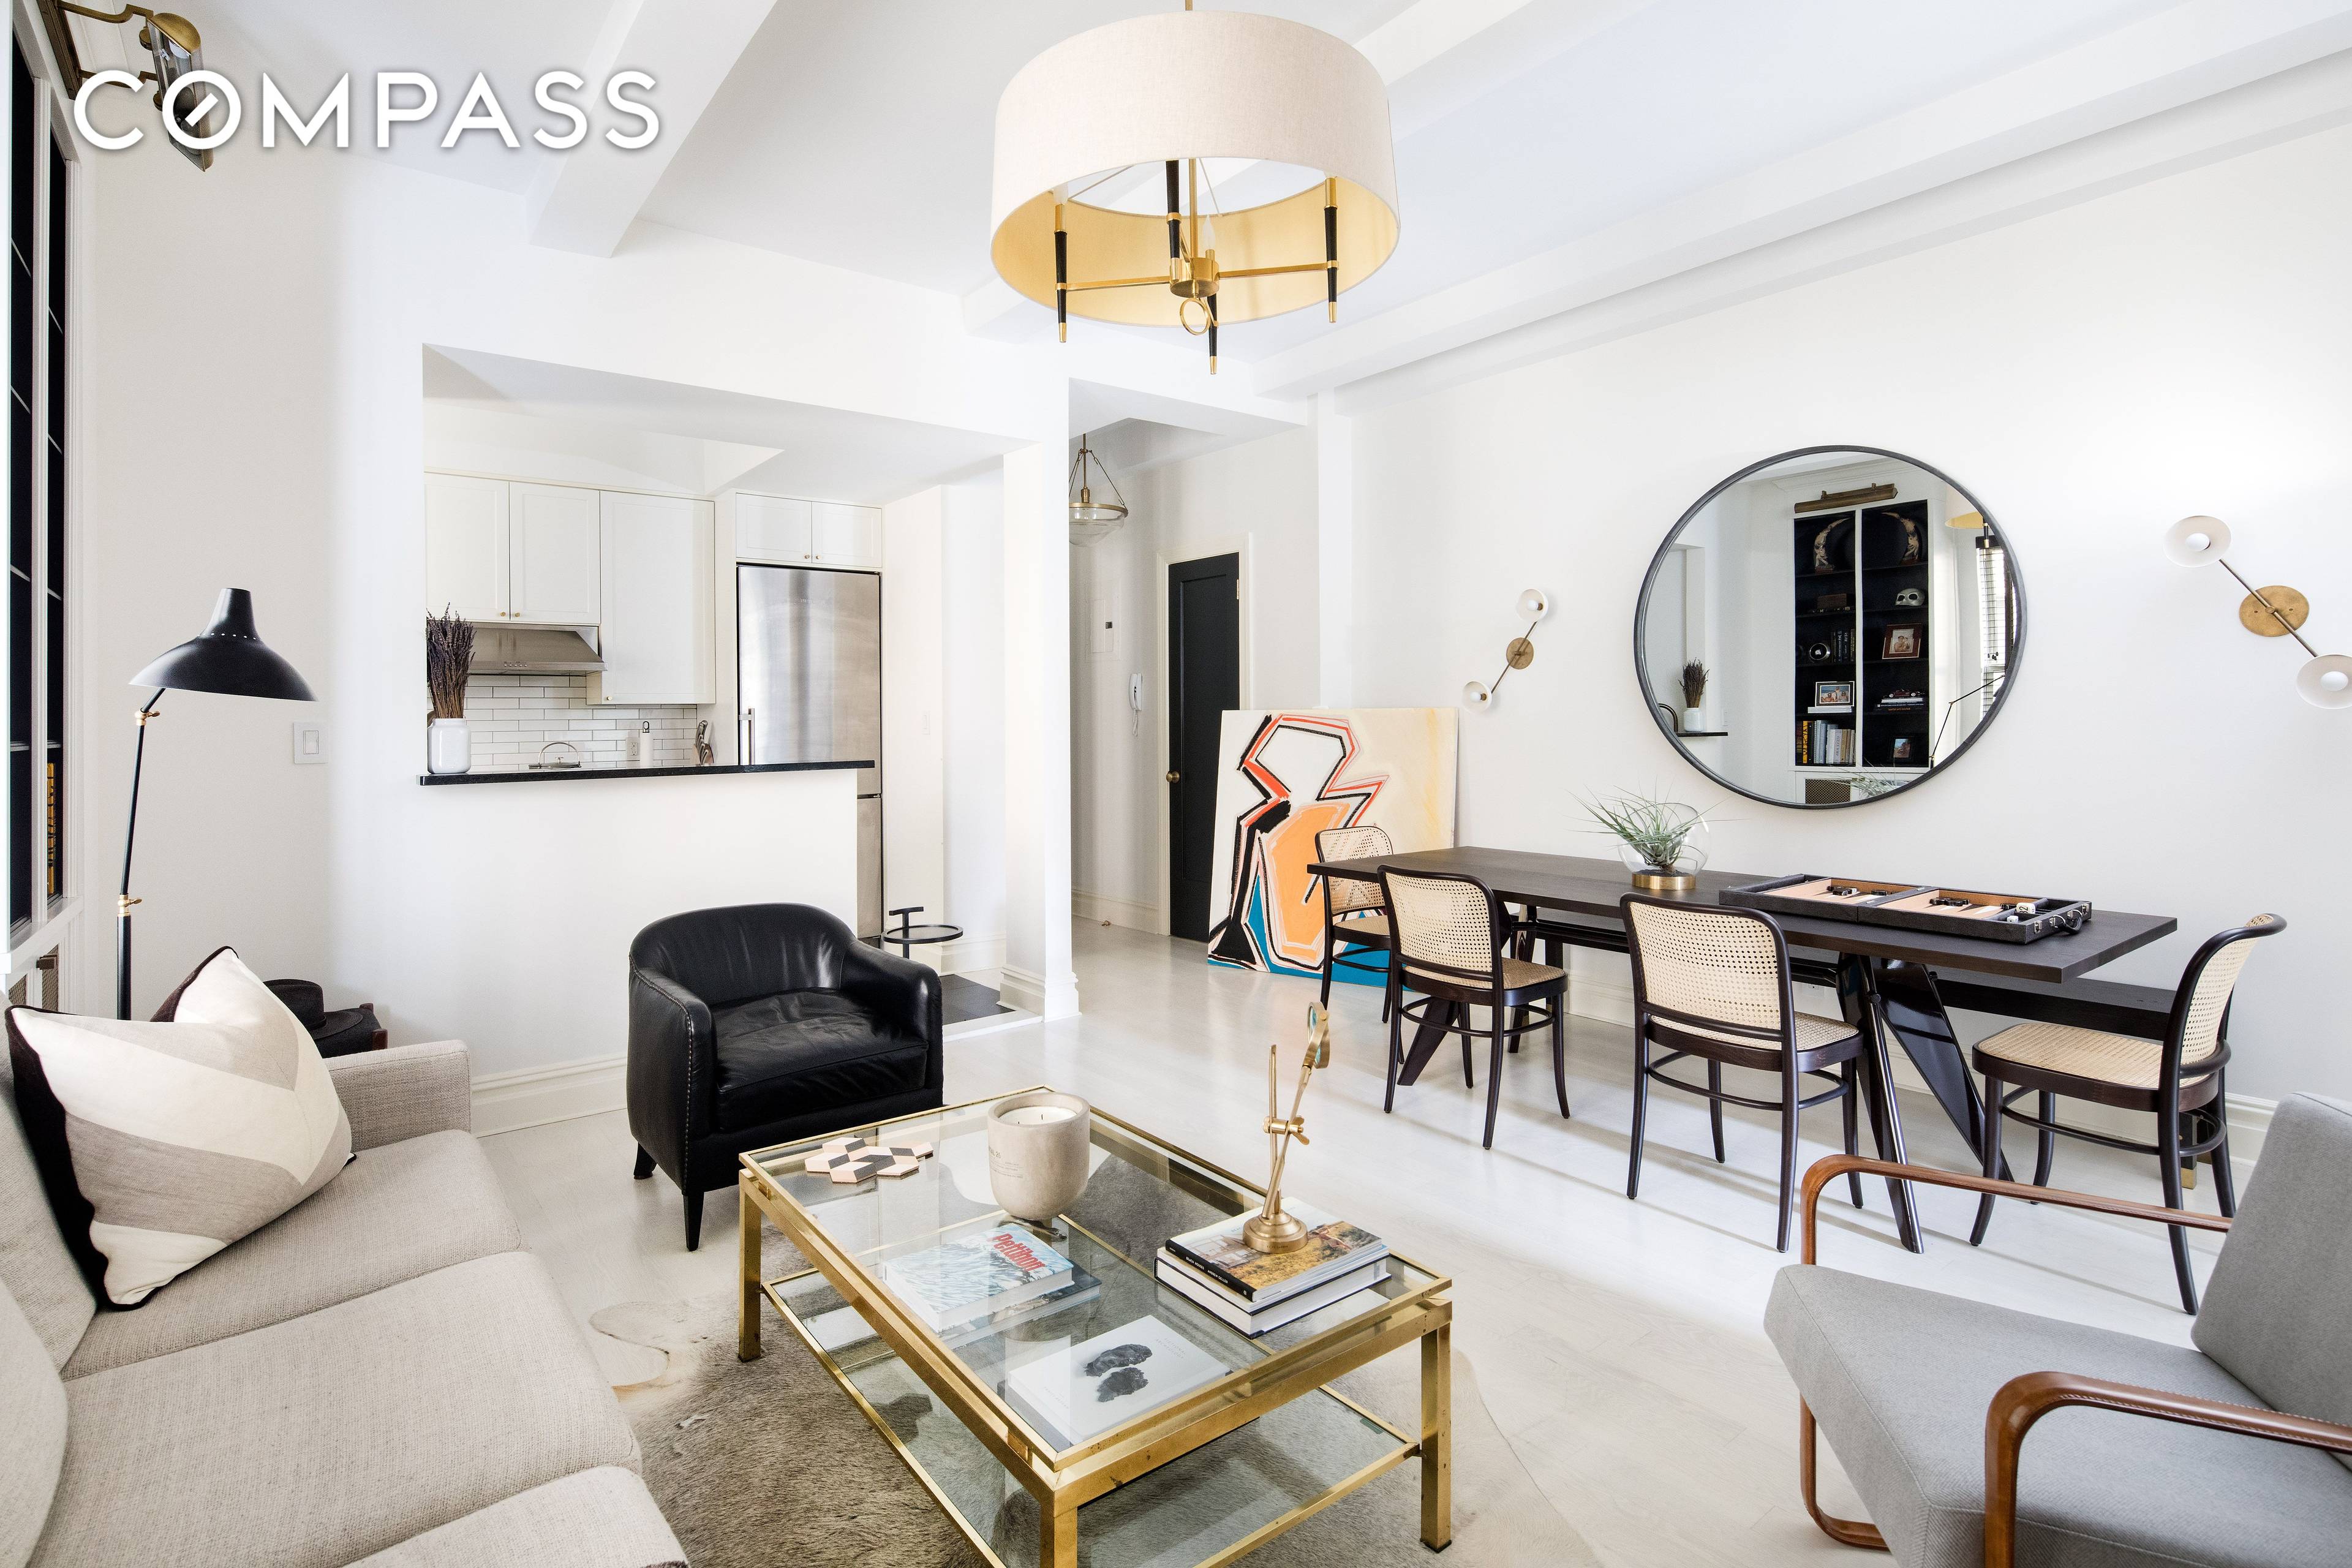 This incredibly meticulous one bedroom pre war Condo is located on the historic Gold Coast of Greenwich Village.